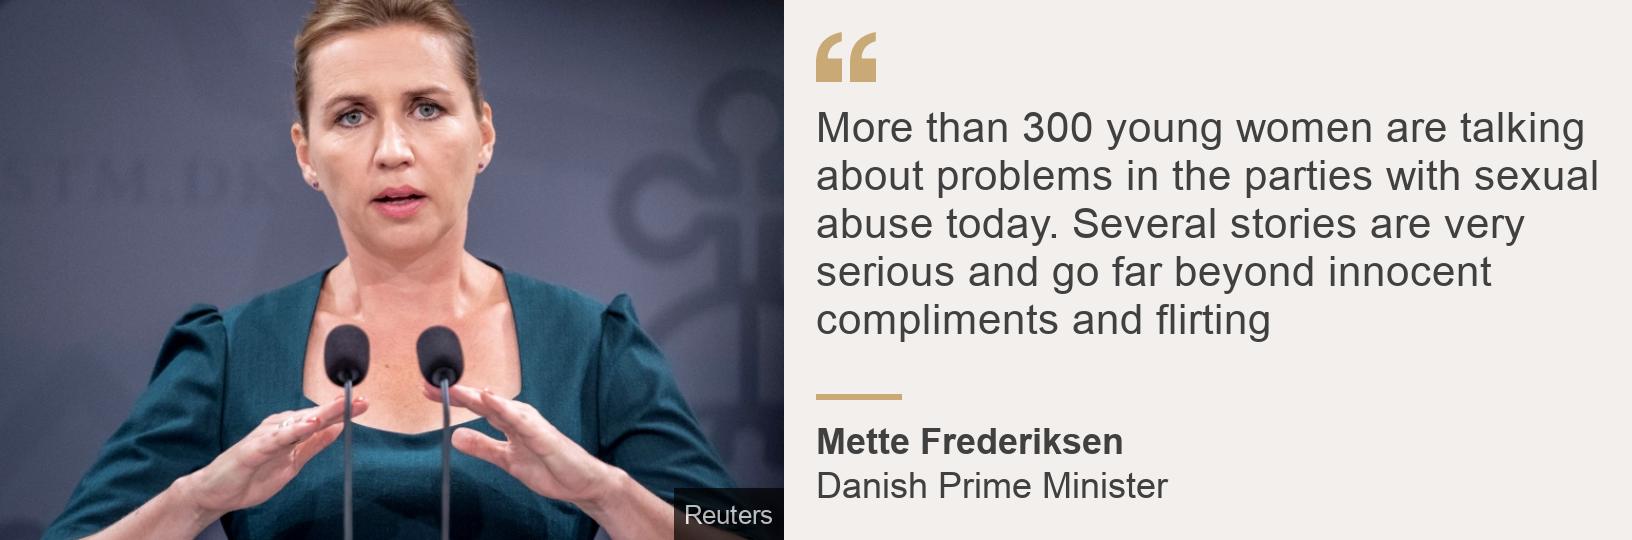 &quot;More than 300 young women are talking about problems in the parties with sexual abuse today. Several stories are very serious and go far beyond innocent compliments and flirting&quot;, Source: Mette Frederiksen, Source description: Danish Prime Minister, Image: Mette Frederiksen